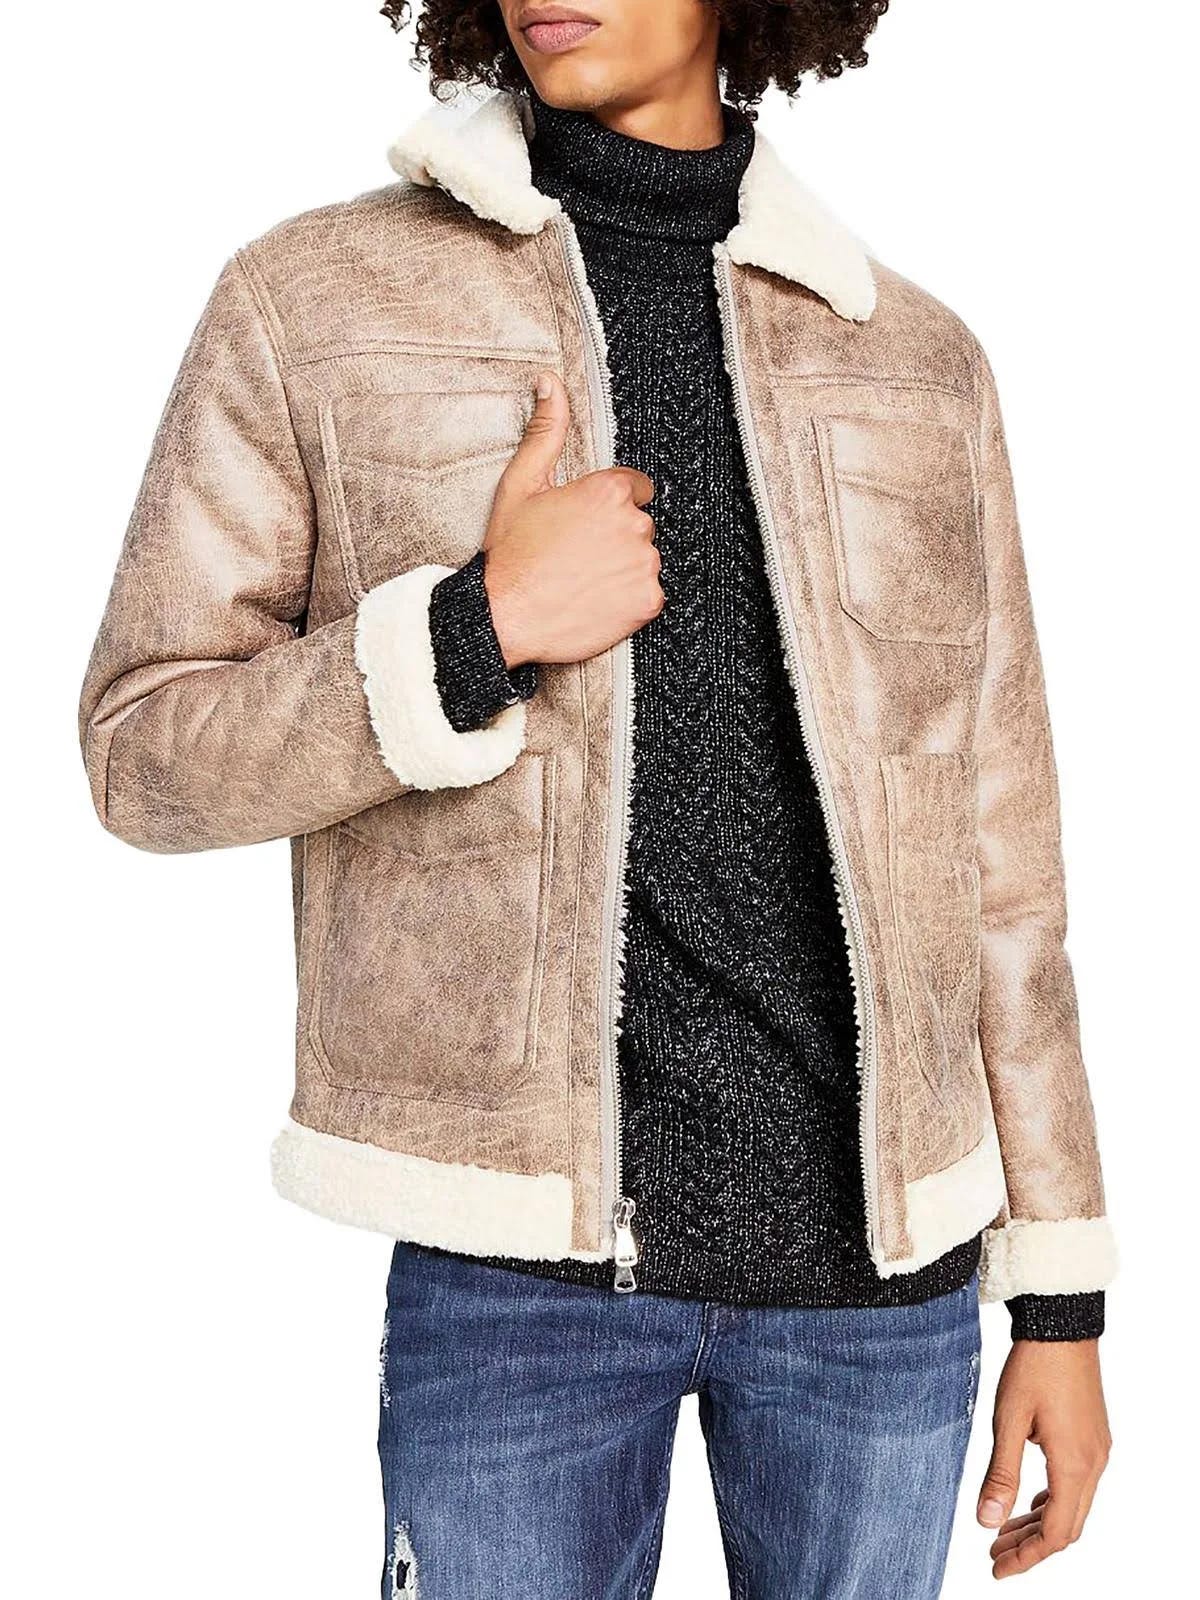 Versatile and Stylish Men's Faux Fur Coat with Fleece Lining | Image